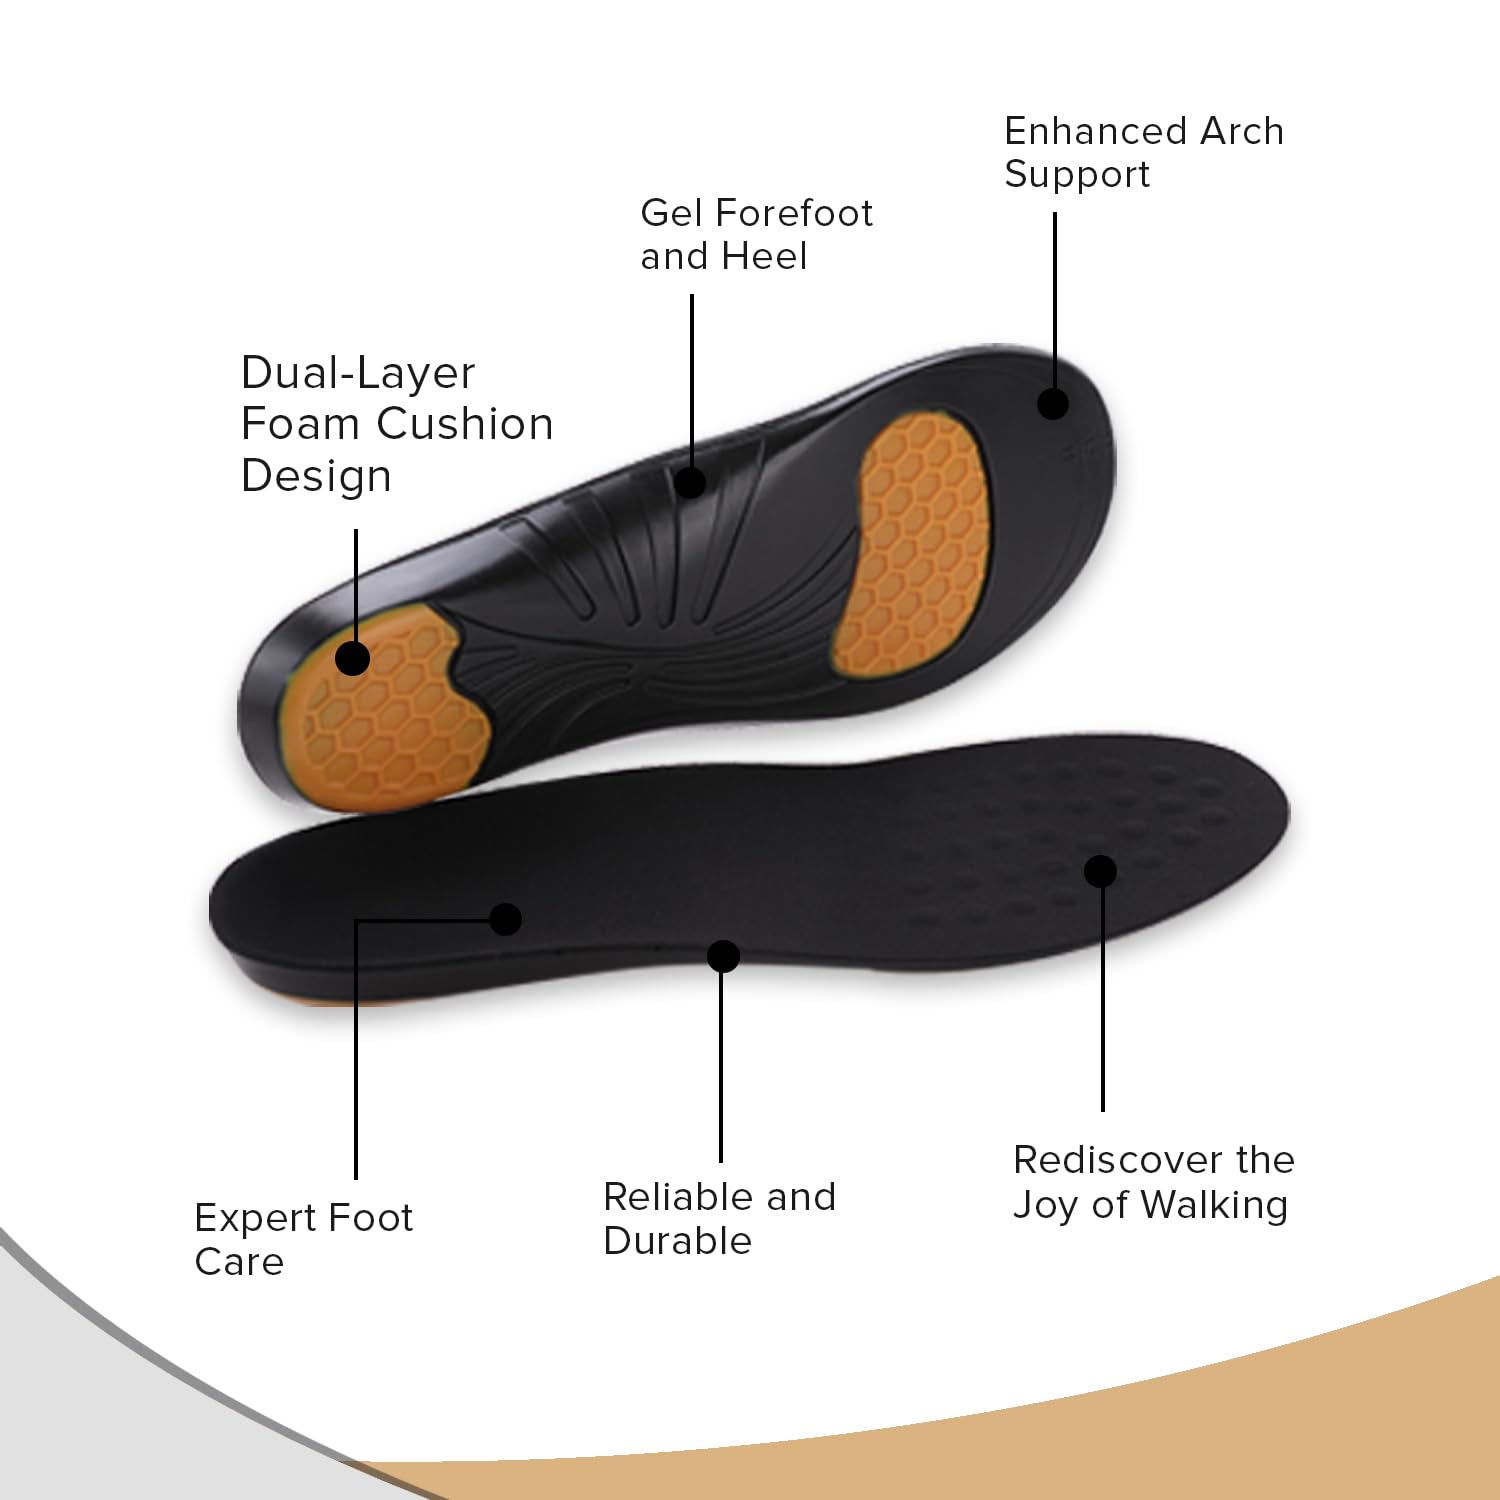 Dr Foot Stabilizing Support Insoles | Breathable Fabric for Dry Feet | Dual-Layer Foam Cushion Design | Maximum Comfort | Gel Forefoot | Heel for Impact Protection | - 1 Pair - (Medium Size)